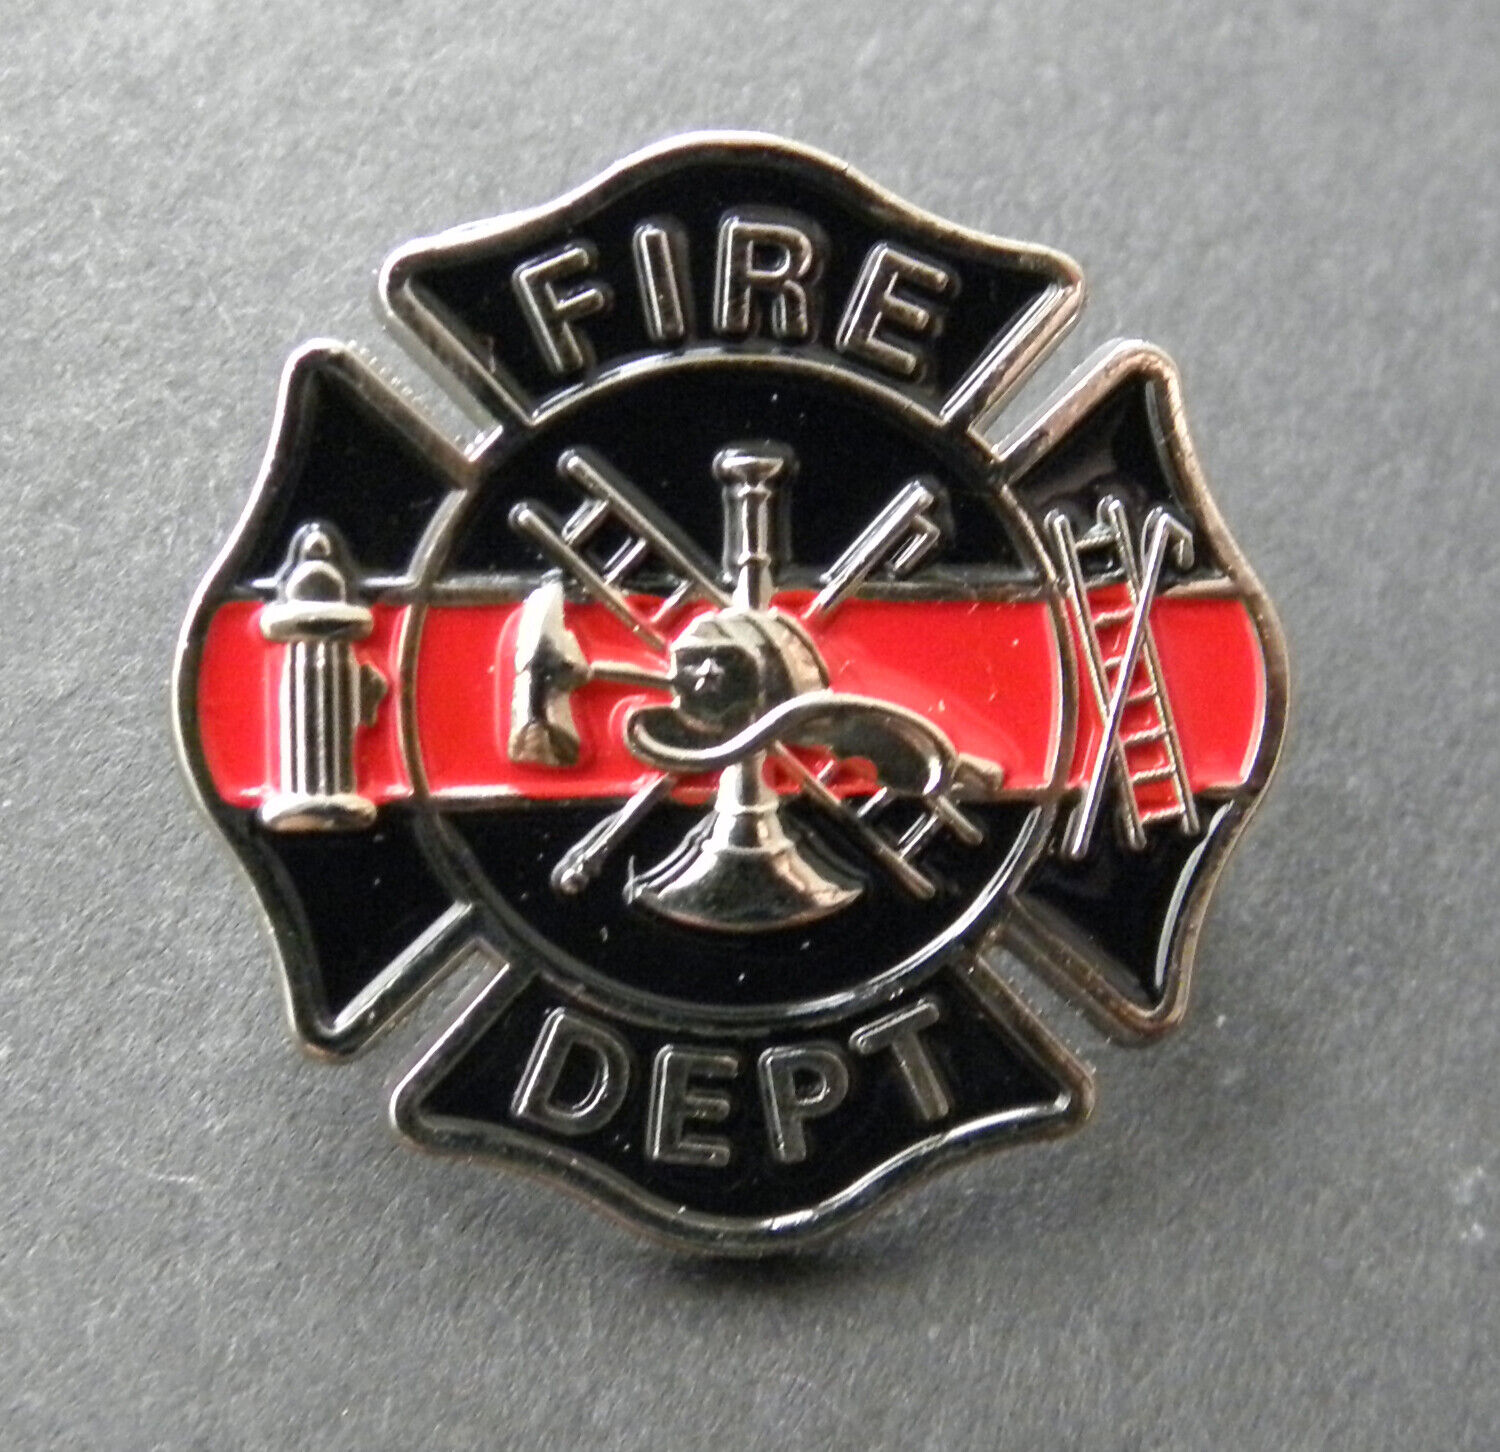 FIREFIGHTER FIRE FIGHTER HONOR SHIELD DEPT BADGE LAPEL PIN 1 INCH EMBOSSED